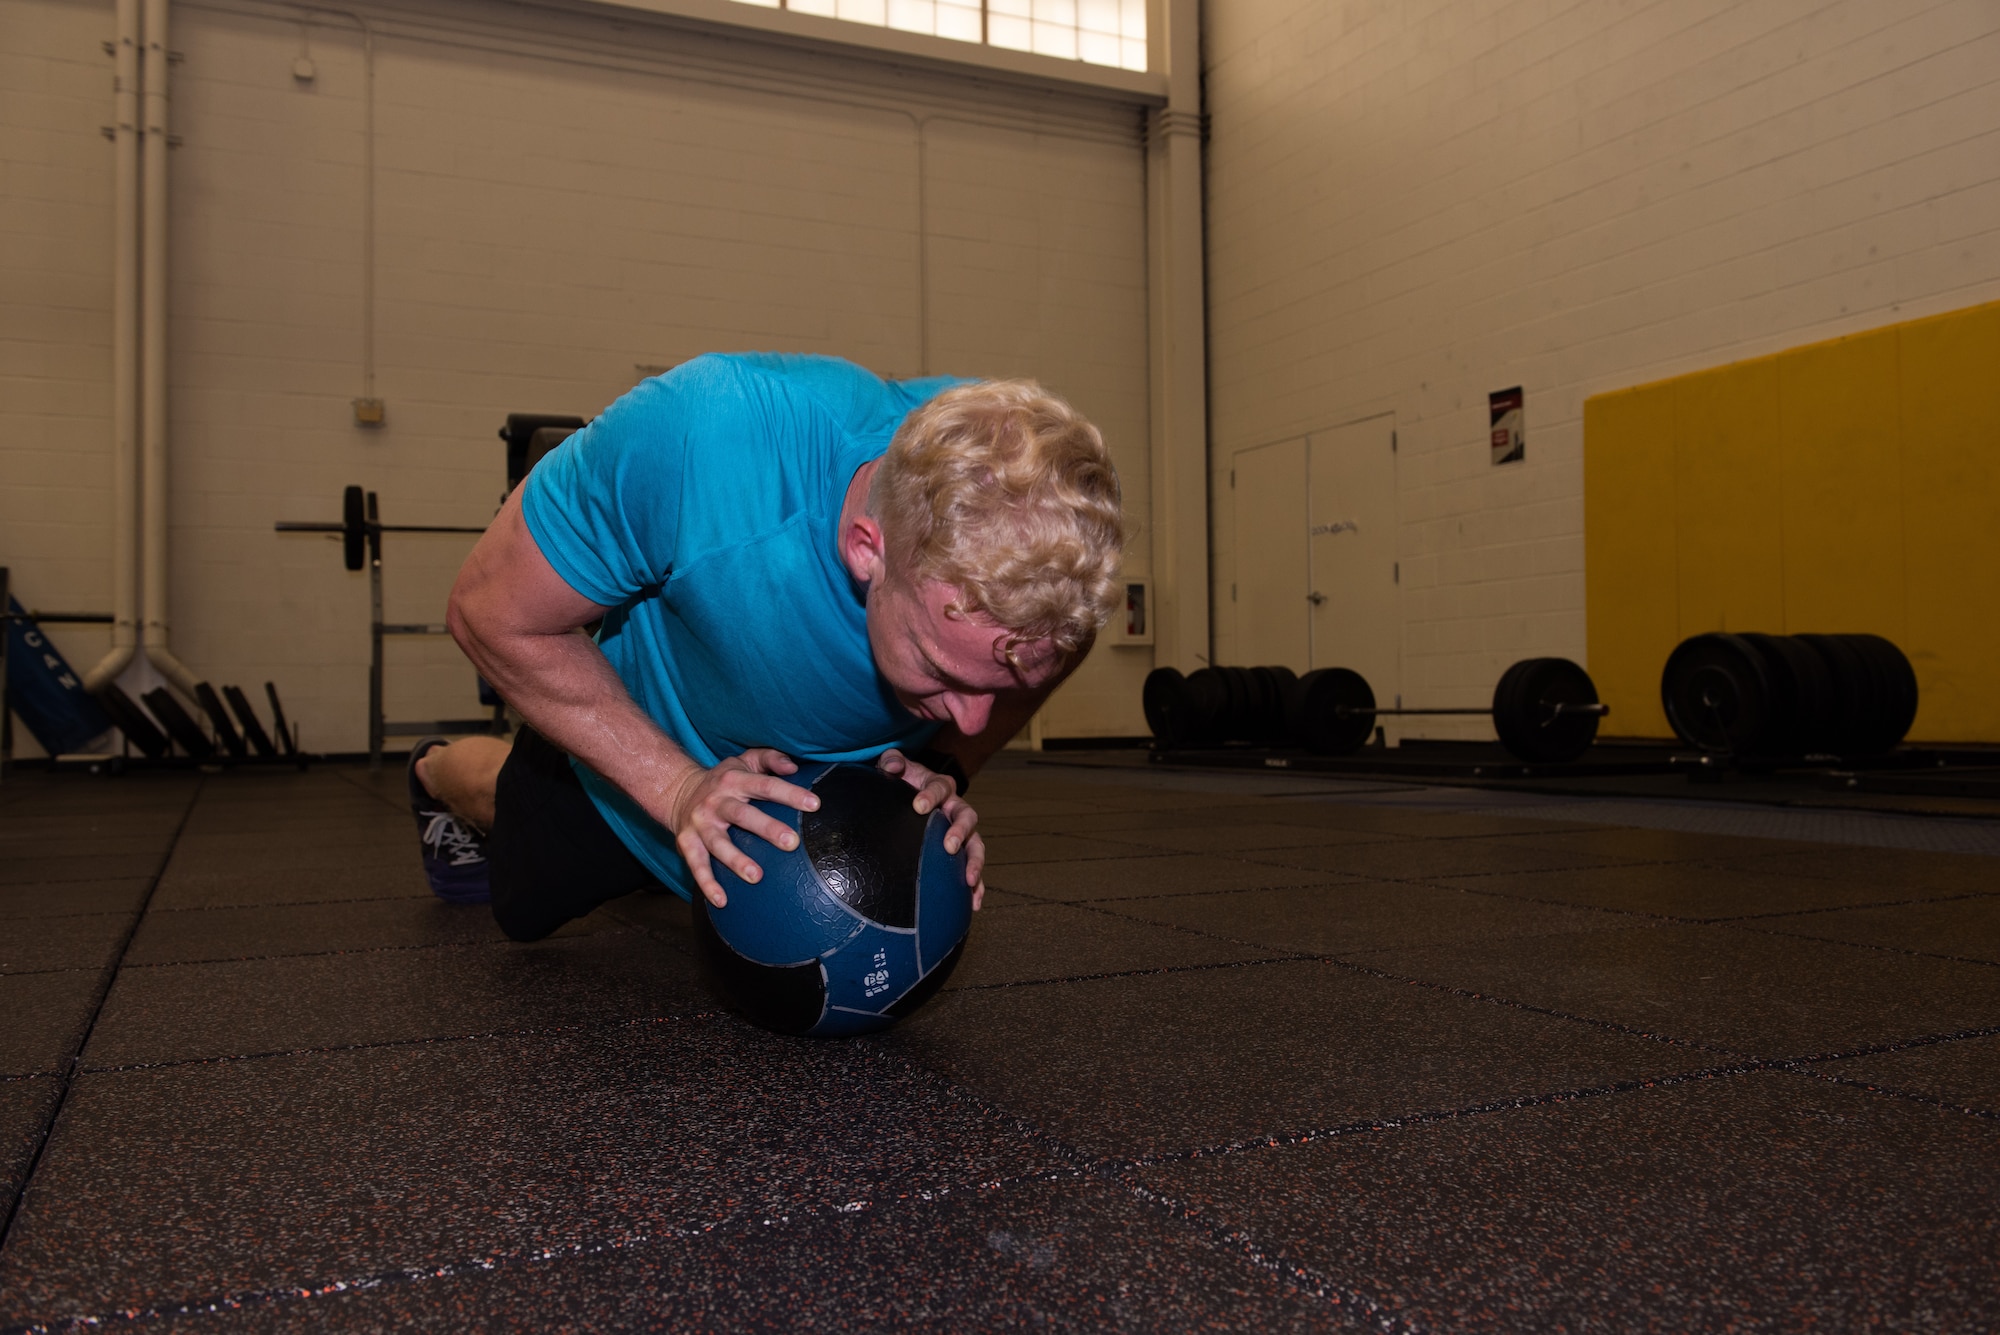 U.S. Air Force Capt. Christopher Williston, a 21st Airlift Squadron C-17 Globemaster III pilot from Baton Rouge, Louisiana, performs push-ups on an 18-pound medicine ball during a workout June 13, 2019, at Travis Air Force Base, California. Williston is training to compete in the Alpha Warrior Western Regional Competition June 21 at Hill AFB, Utah. (U.S. Air Force photo by Tech. Sgt. James Hodgman)